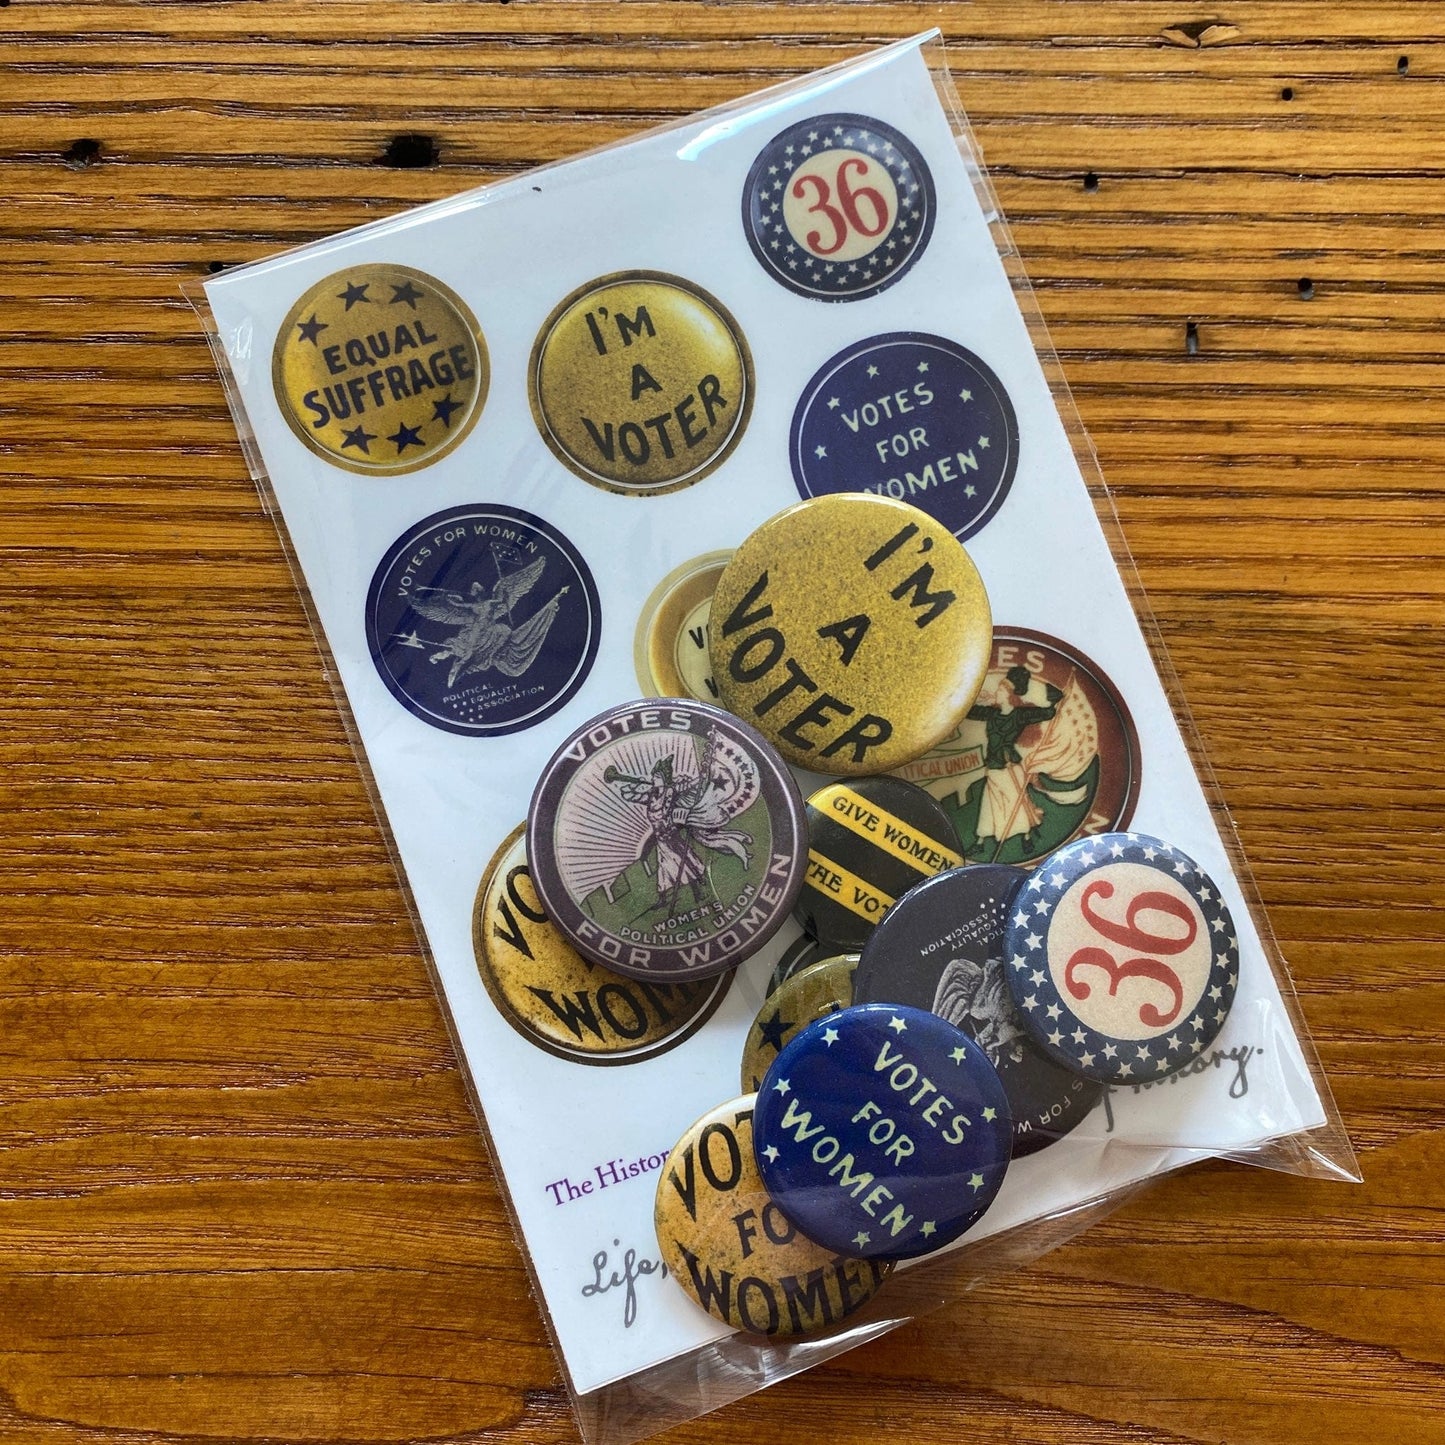 Suffrage Campaign historical button pins and sticker sheet bundle from the History List Store